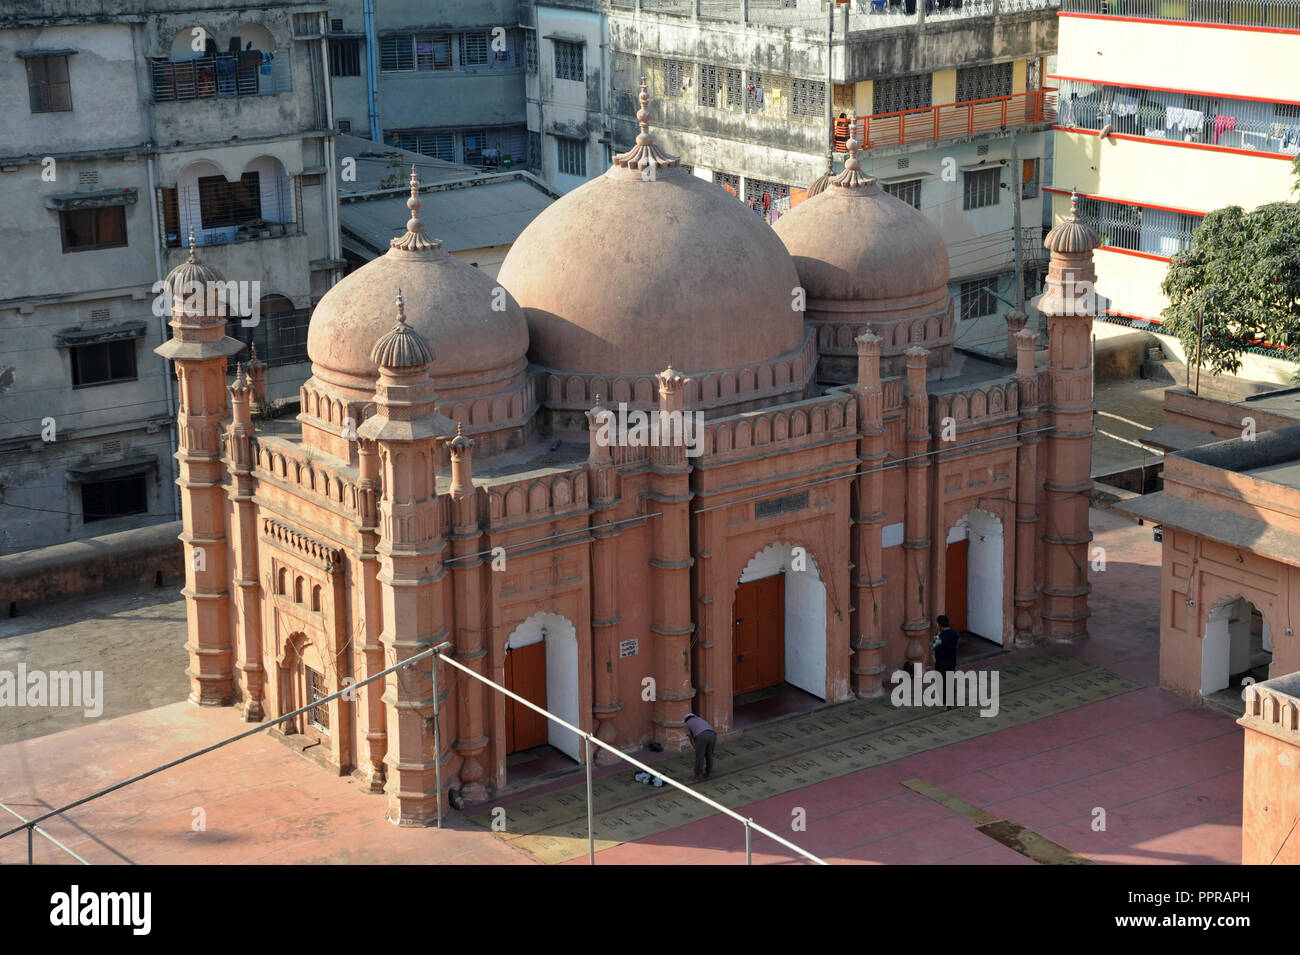 Dhaka, Bangladesh - December 21, 2009: The Khan Mohammad Mirza Mosque on Lalbagh road is situated less than half a kilometre west of the Lalbagh Fort. Stock Photo